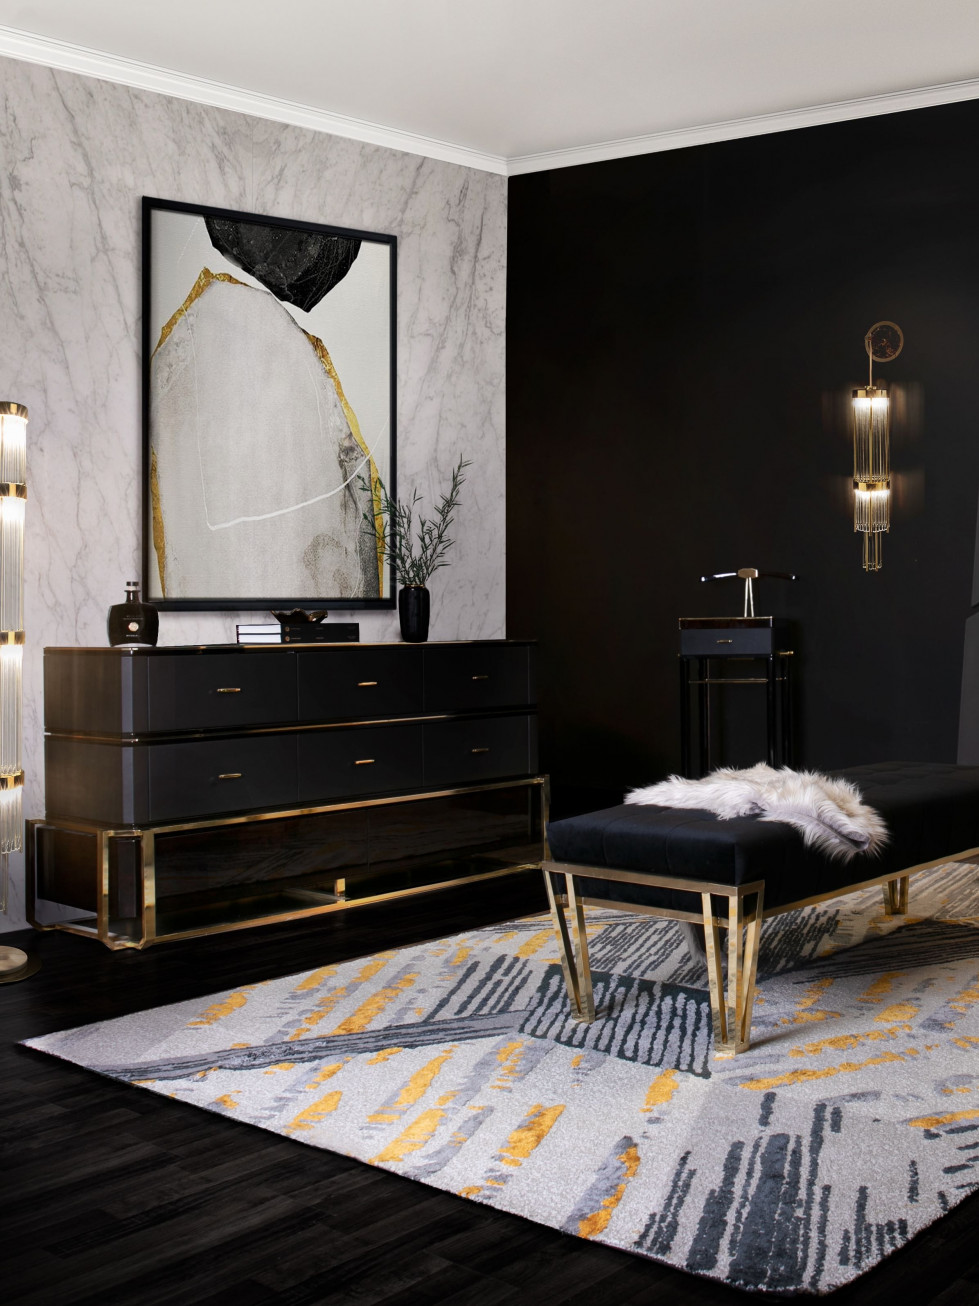 Modern bedroom decor with dark tones, gold accents and Xisto rug. home inspiration ideas